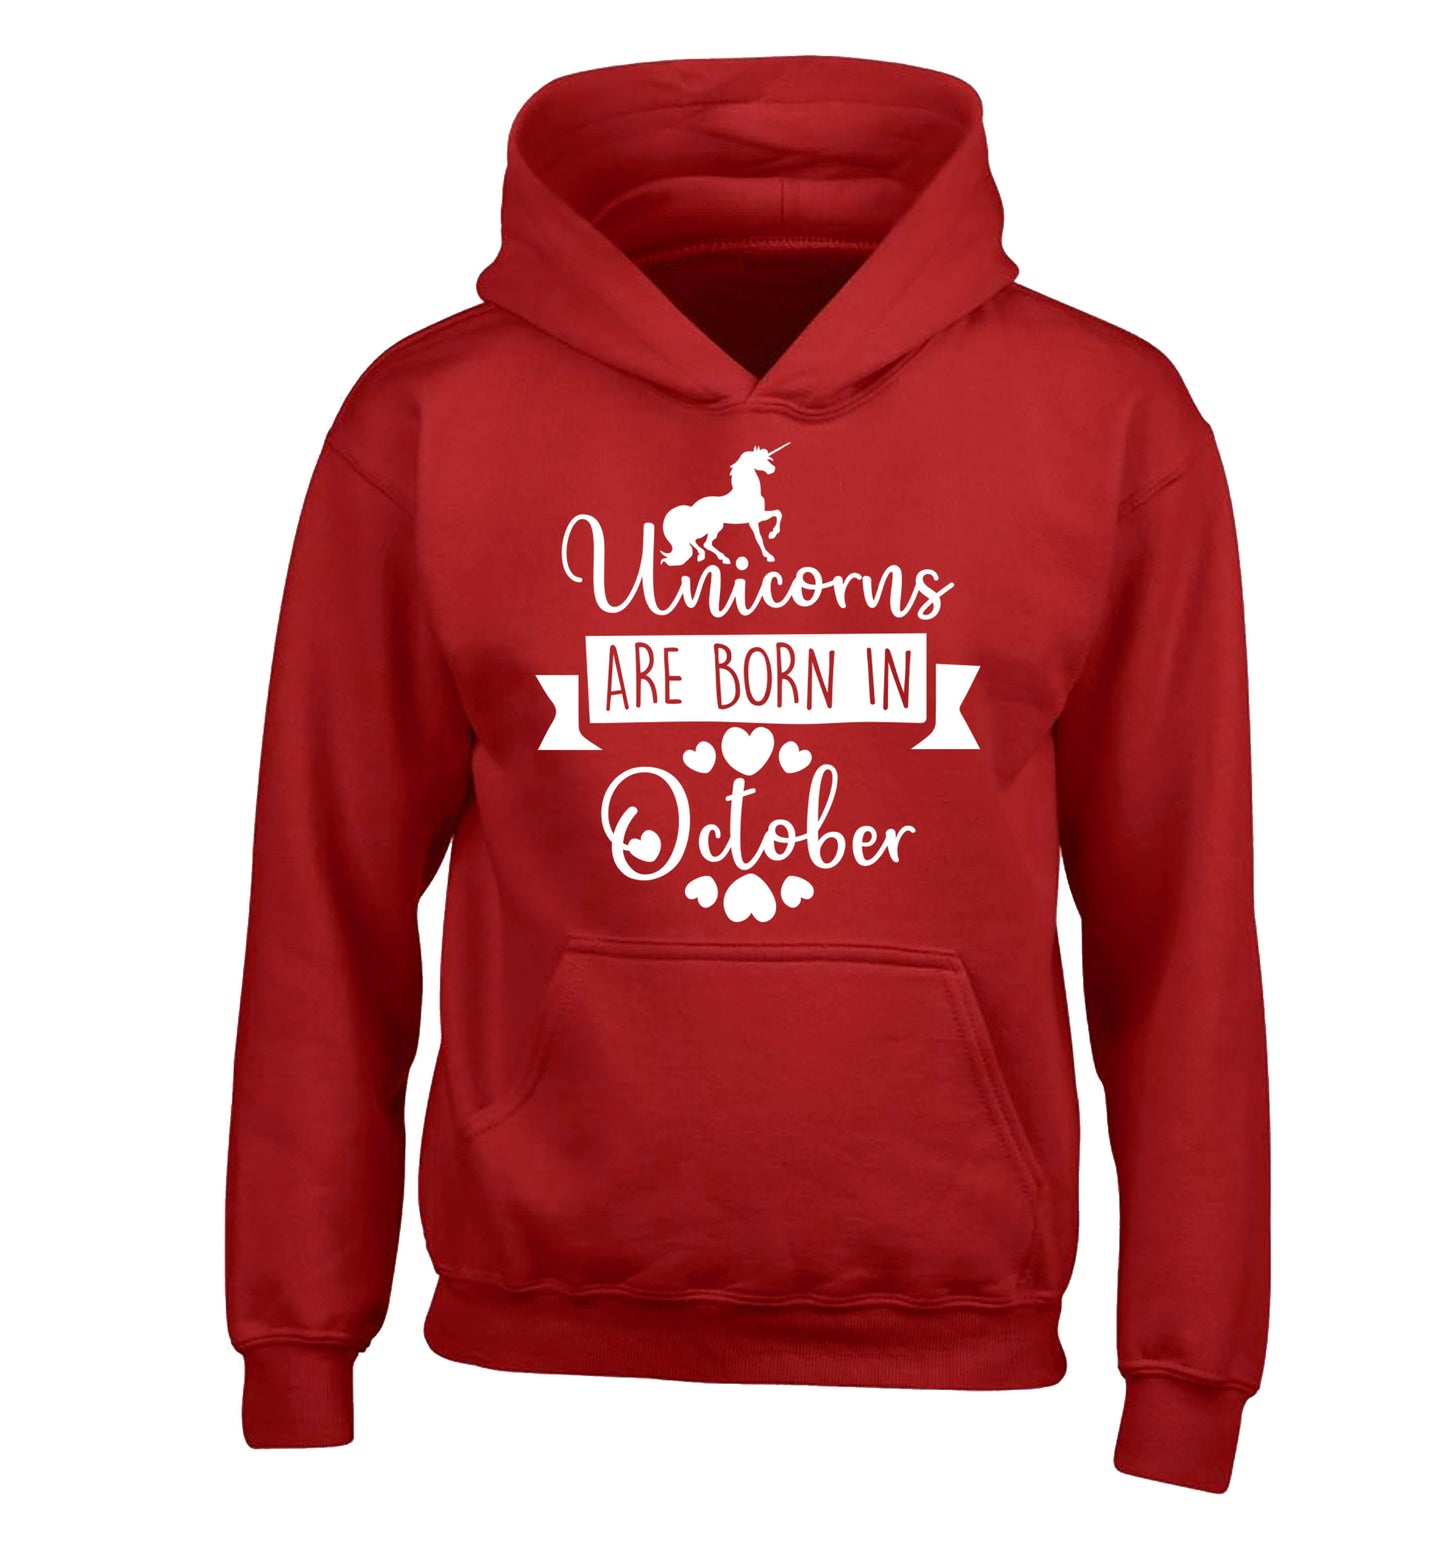 Unicorns are born in October children's red hoodie 12-13 Years